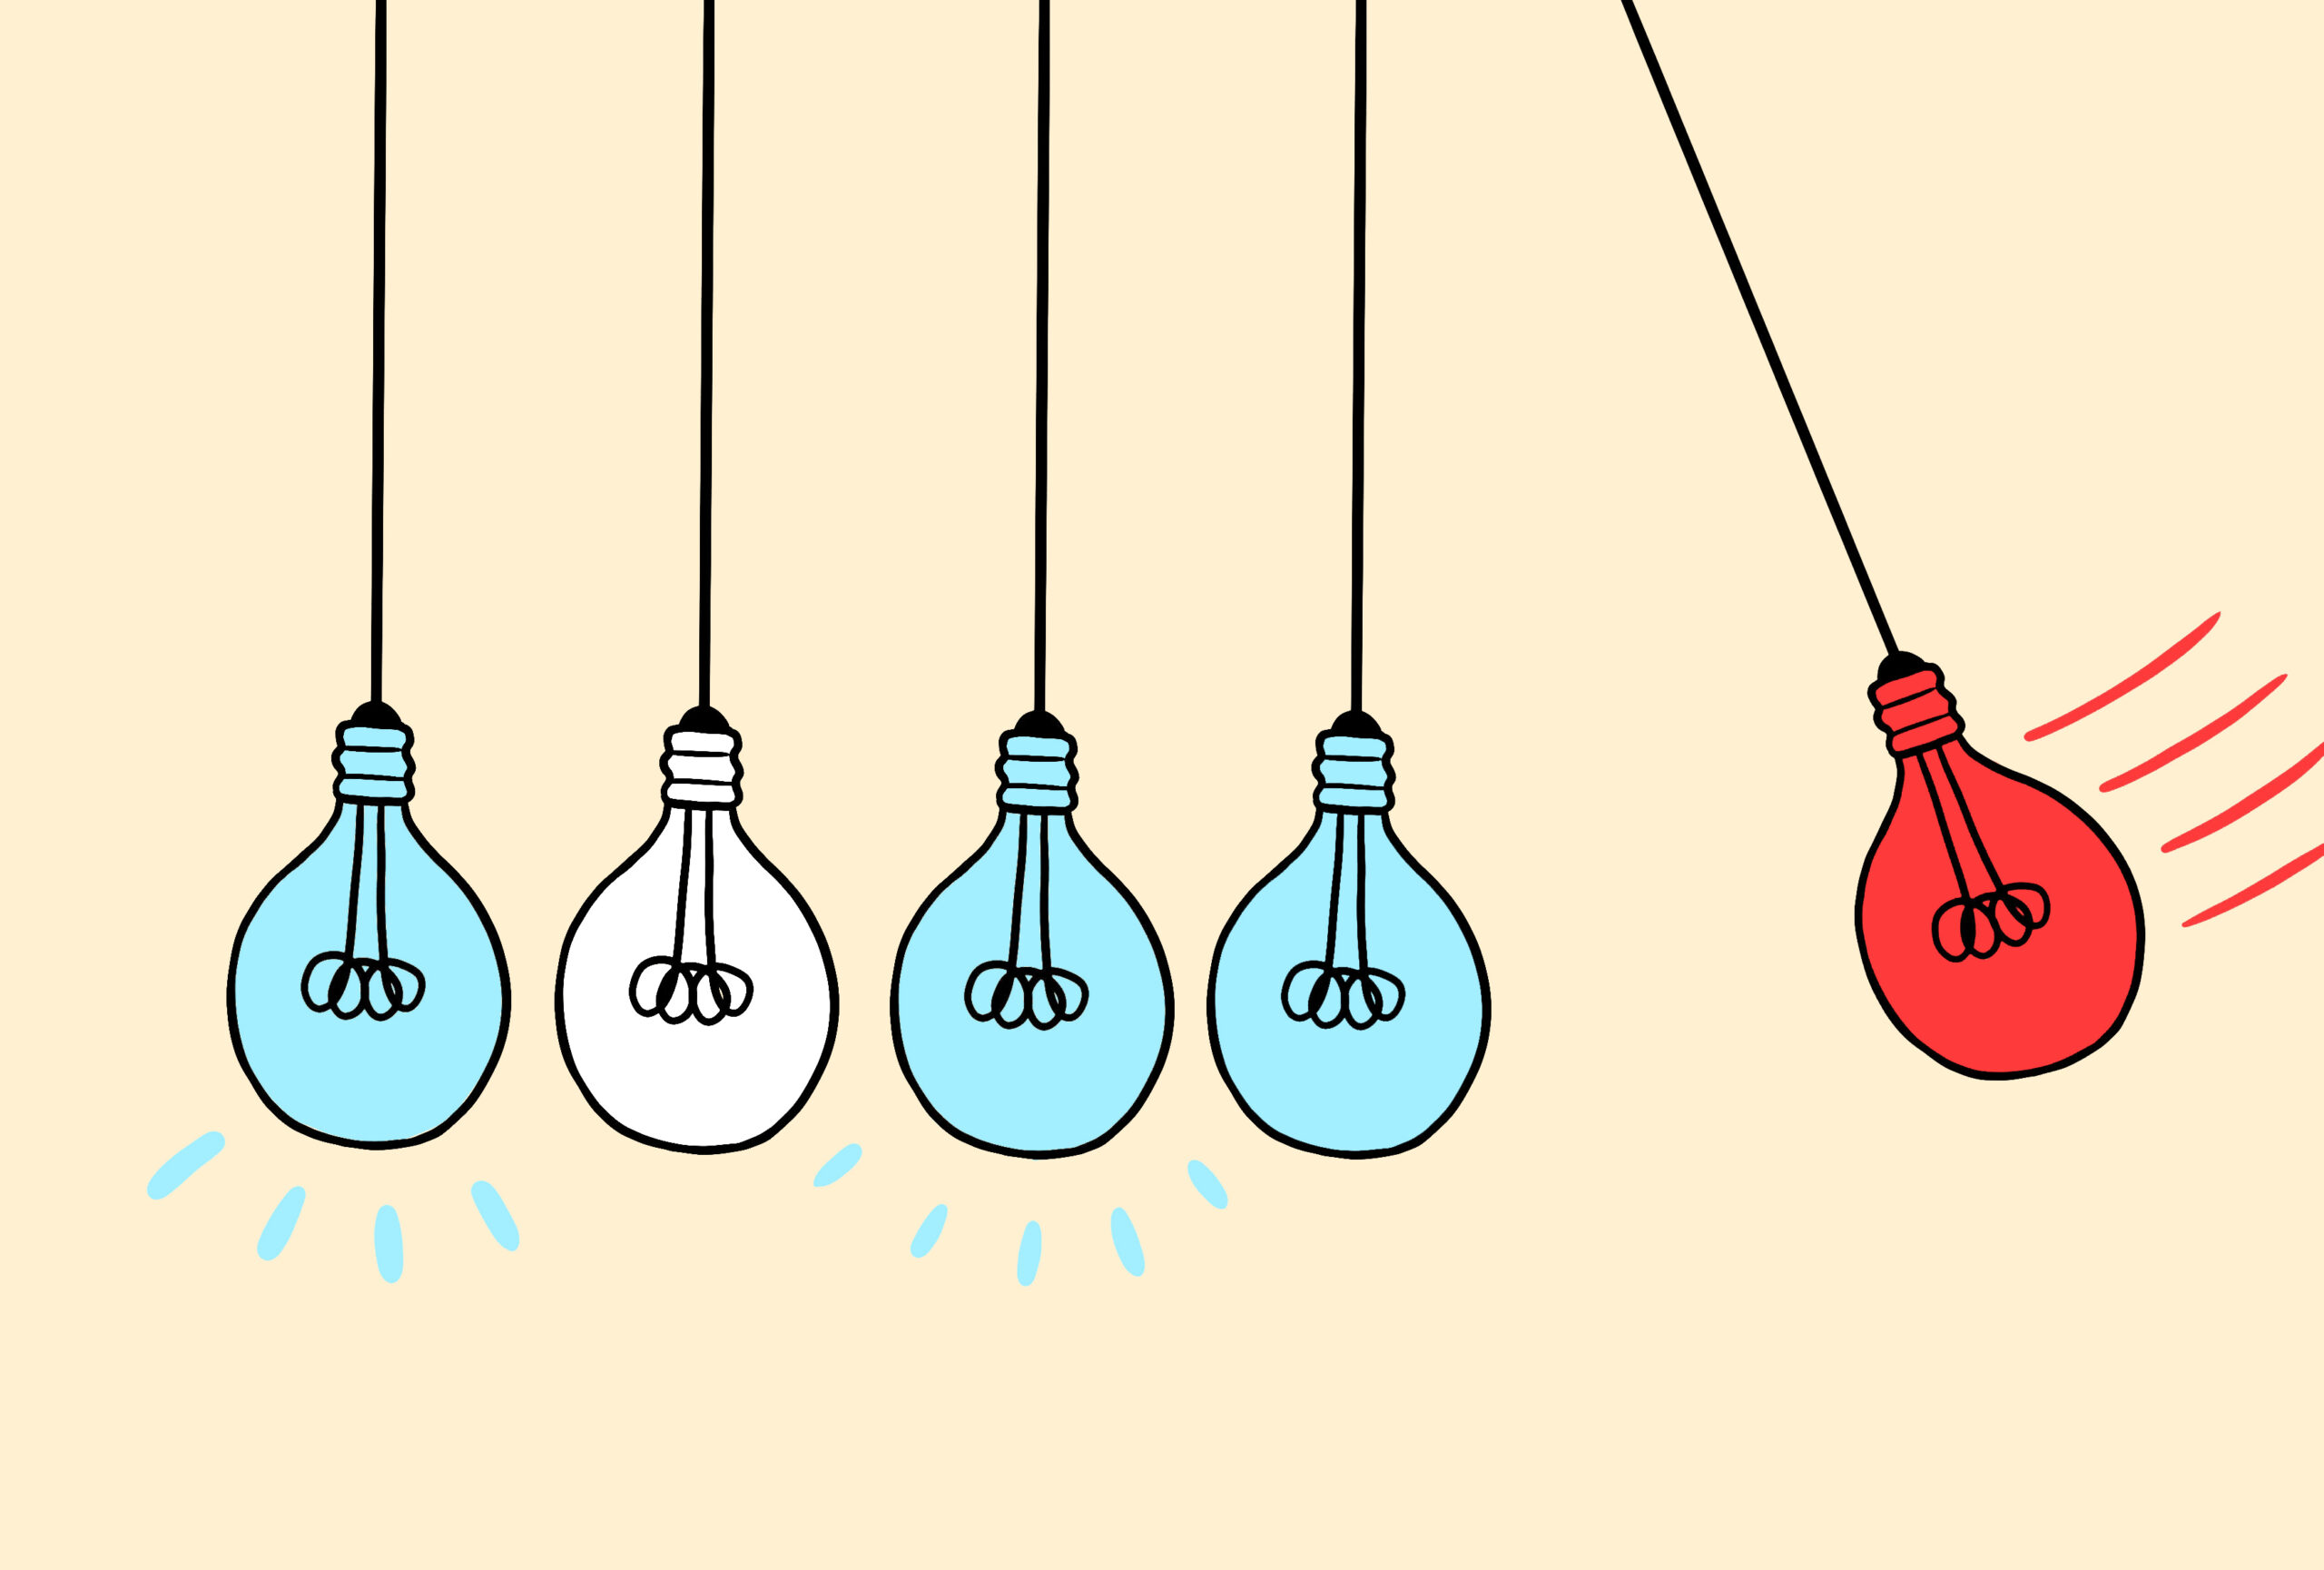 Illustration of hybrid objects: part light bulb, part lab vial, some in blue and some in red to signify null and replicated results.